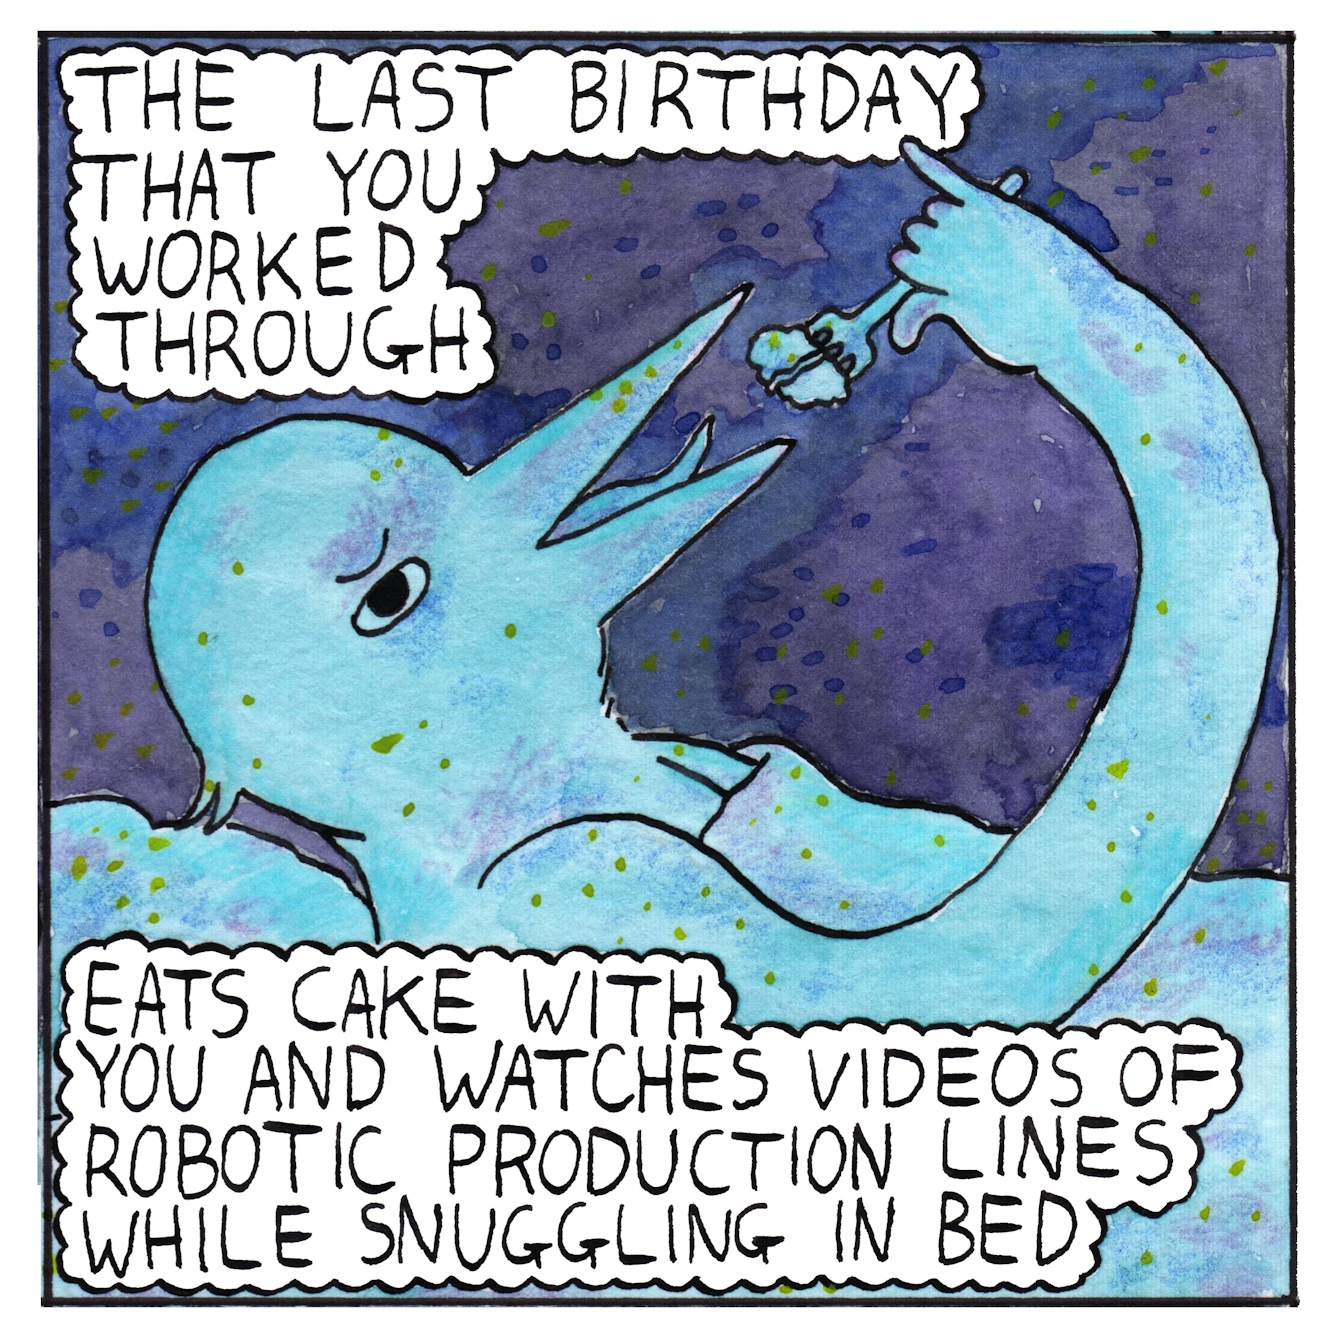 Panel four of a six-panel comic made with ink, watercolour and colour pencils: Against the deep purple background, a humanoid bird-being lies horizontally with their body covered by a bed-sheet. Their head is in profile as they open their long beak to feed themselves cake from a fork, their eye looks out at the viewer. Text bubbles at top and bottom of the panel read: “The last birthday that you worked through, eats cake with you and watches videos of robotic production lines while snuggling in bed”